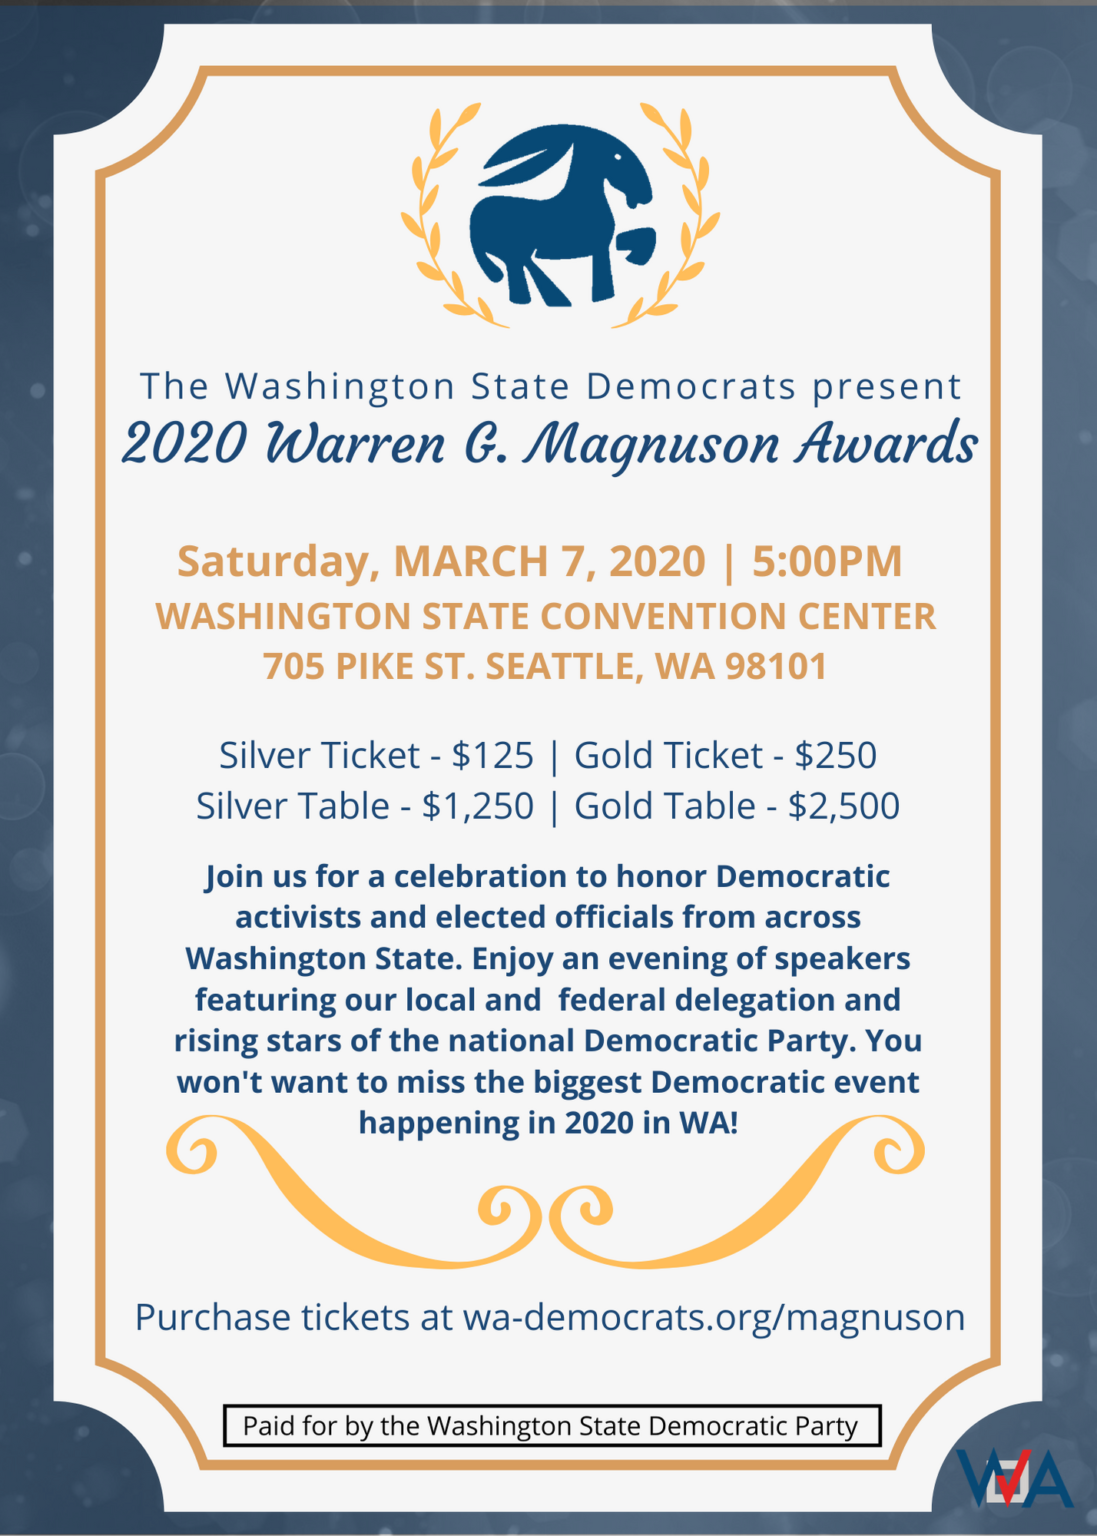 The Washington State Democrats present the 2020 Warren G. Magnuson Awards. Saturday, March 20 at 5:00 PM. Washington State Convention Center, 705 Pike St, Seattle, WA 98101. Silver Ticket: $125. Gold Ticket: $250. Silver Table: $1,250. Gold Table: $2,500. Join us for a celebration to honor Democratic activists and elected officials from across Washington State. Enjoy an evening of speakers featuring our local and federal delegation and rising stars of the national Democratic Party. You won't want to miss the biggest Democratic event happening in 2020 in WA! Purchase tickets at wa-democrats.org/magnuson. Paid for by the Washington State Democratic Party.